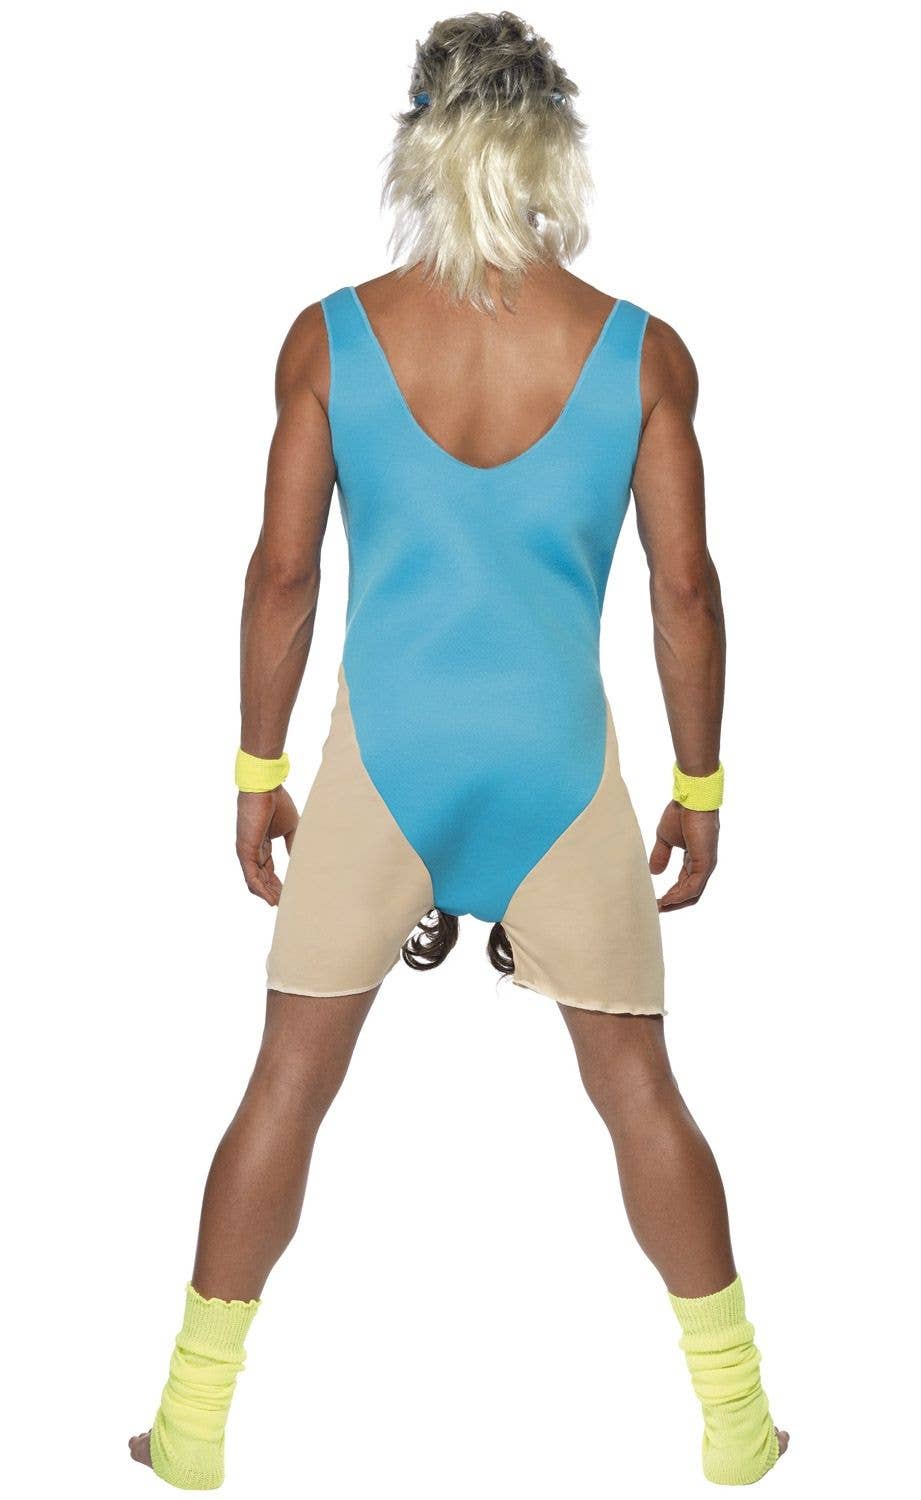 Aerobics Workout Costume | Men's Funny Lets Get Physical Costume